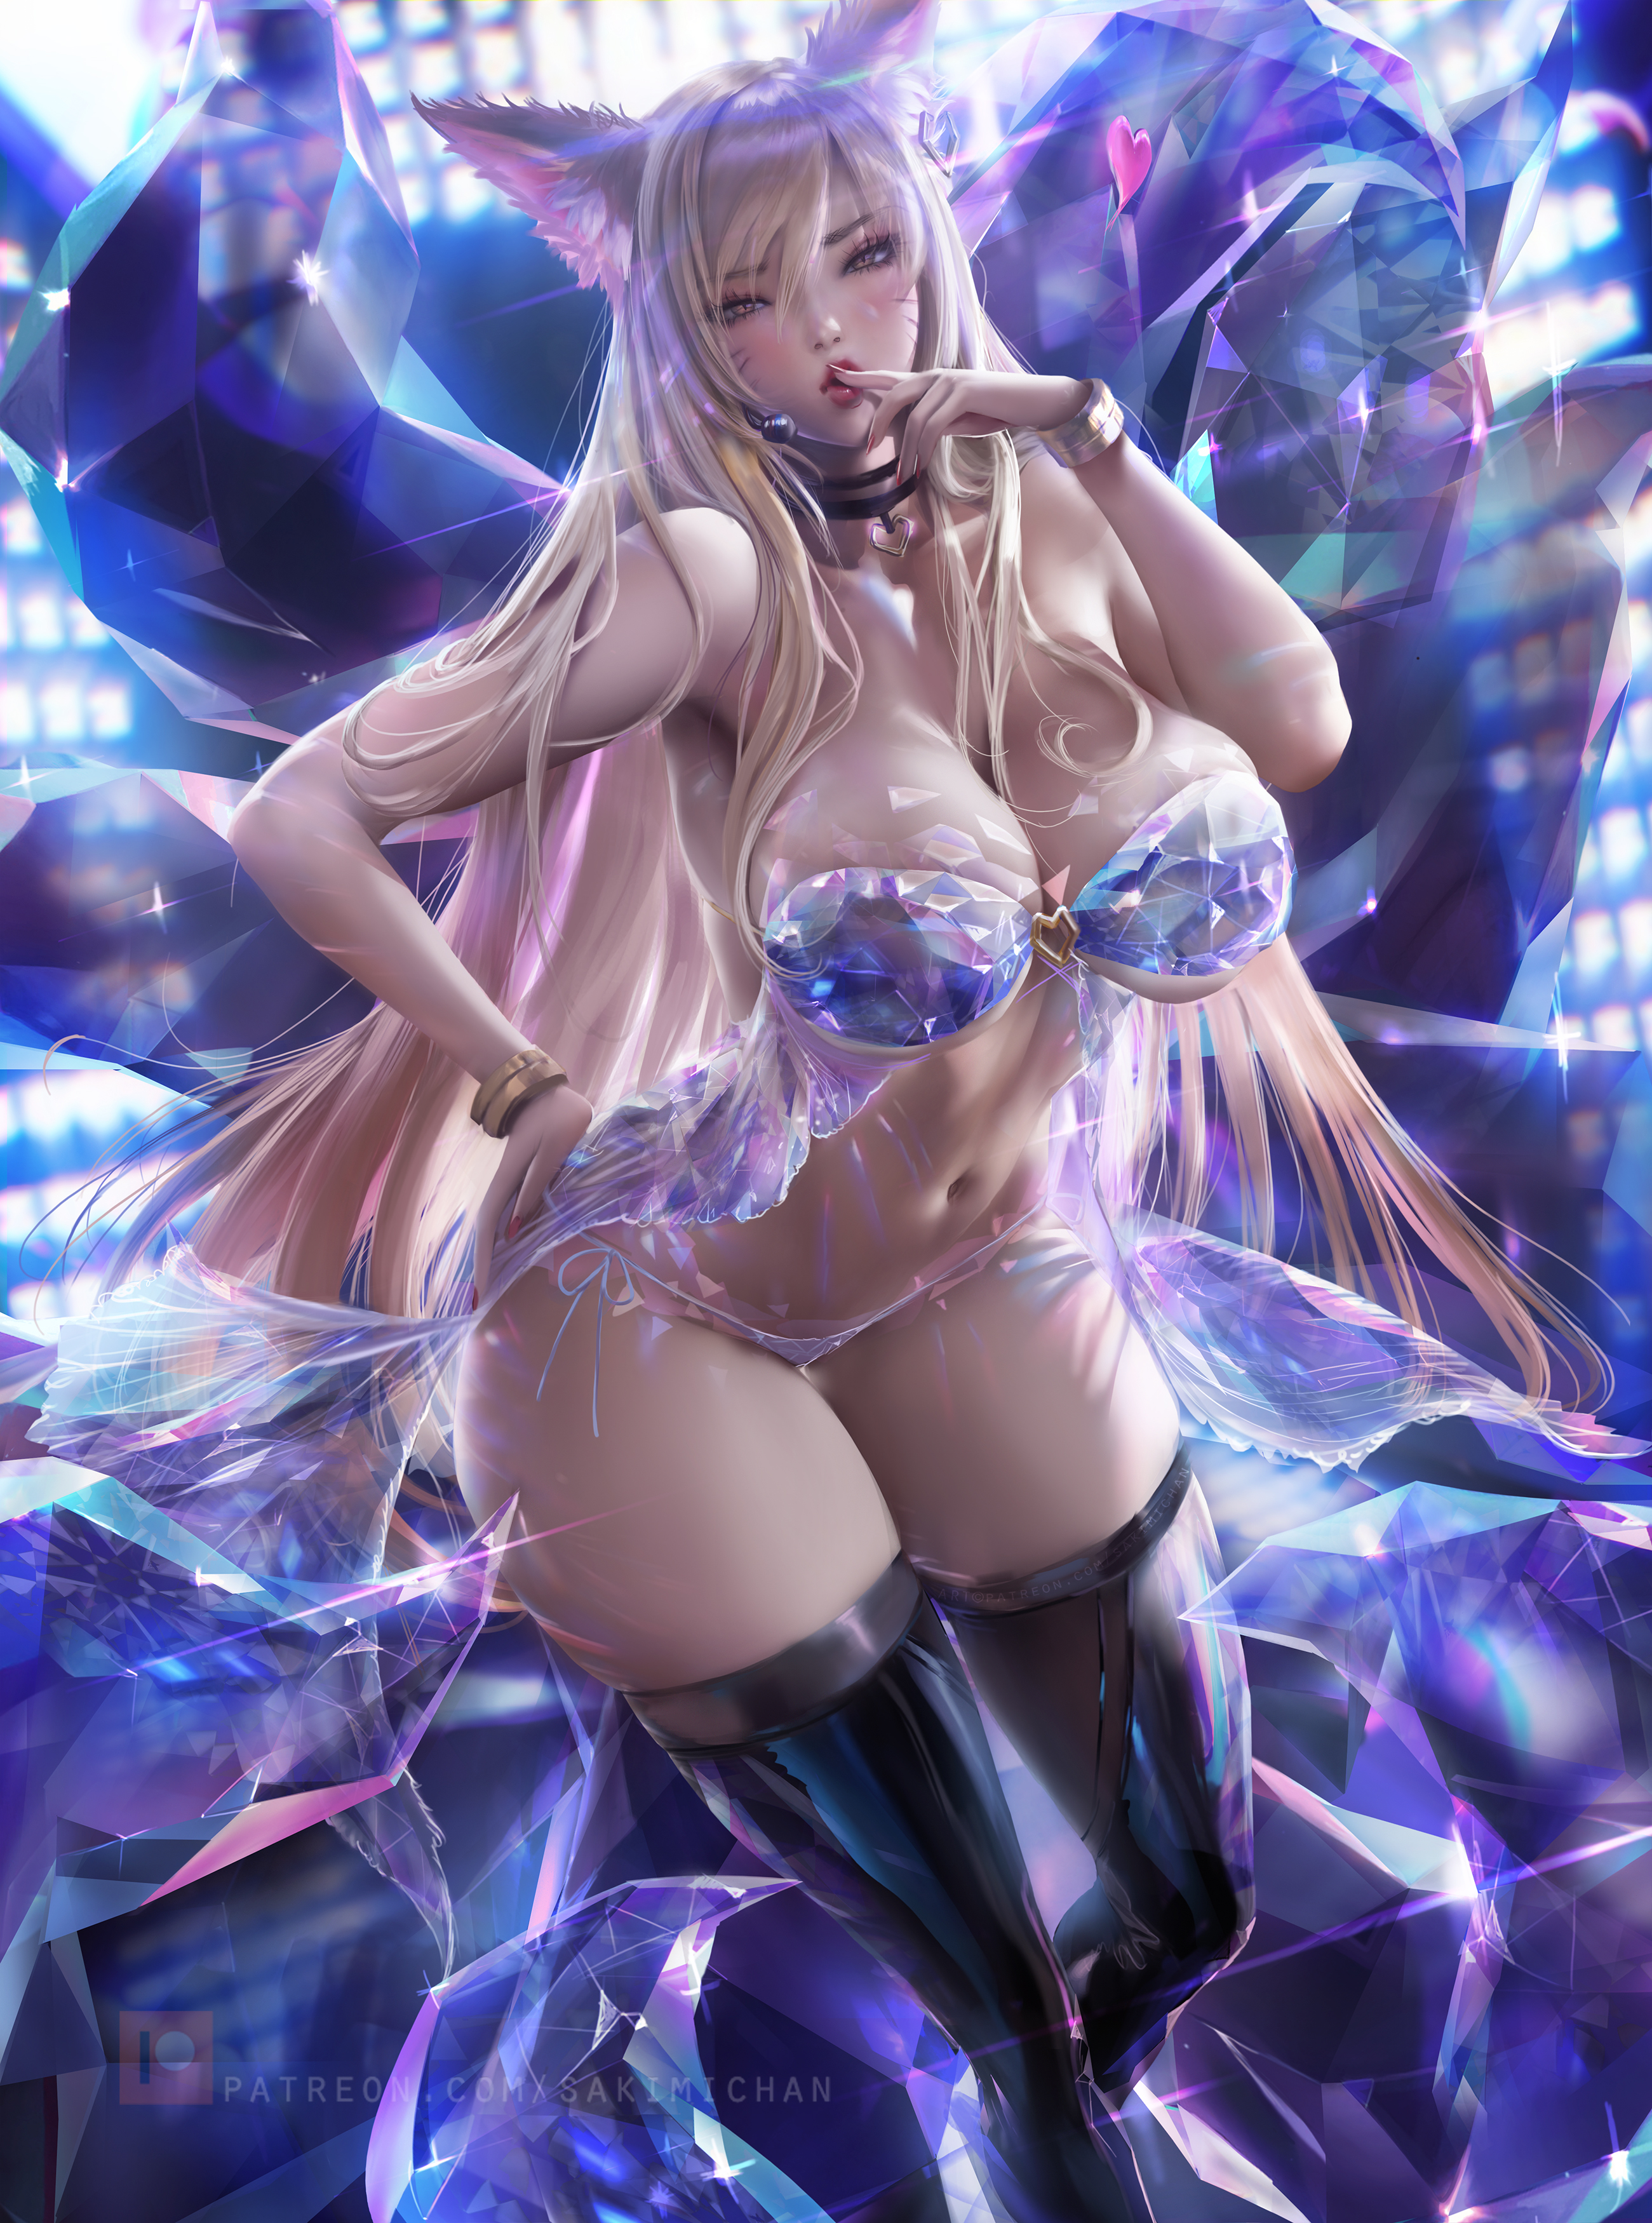 General 2601x3500 Ahri (League of Legends) League of Legends K/DA video games blonde long hair fantasy girl fox girl fox ears looking sideways yellow eyes choker cleavage babydolls underwear panties belly thick thigh thigh-highs curvy portrait display drawing fan art Sakimichan PC gaming video game art video game girls boobs big boobs huge breasts looking at viewer fantasy art animal ears video game characters